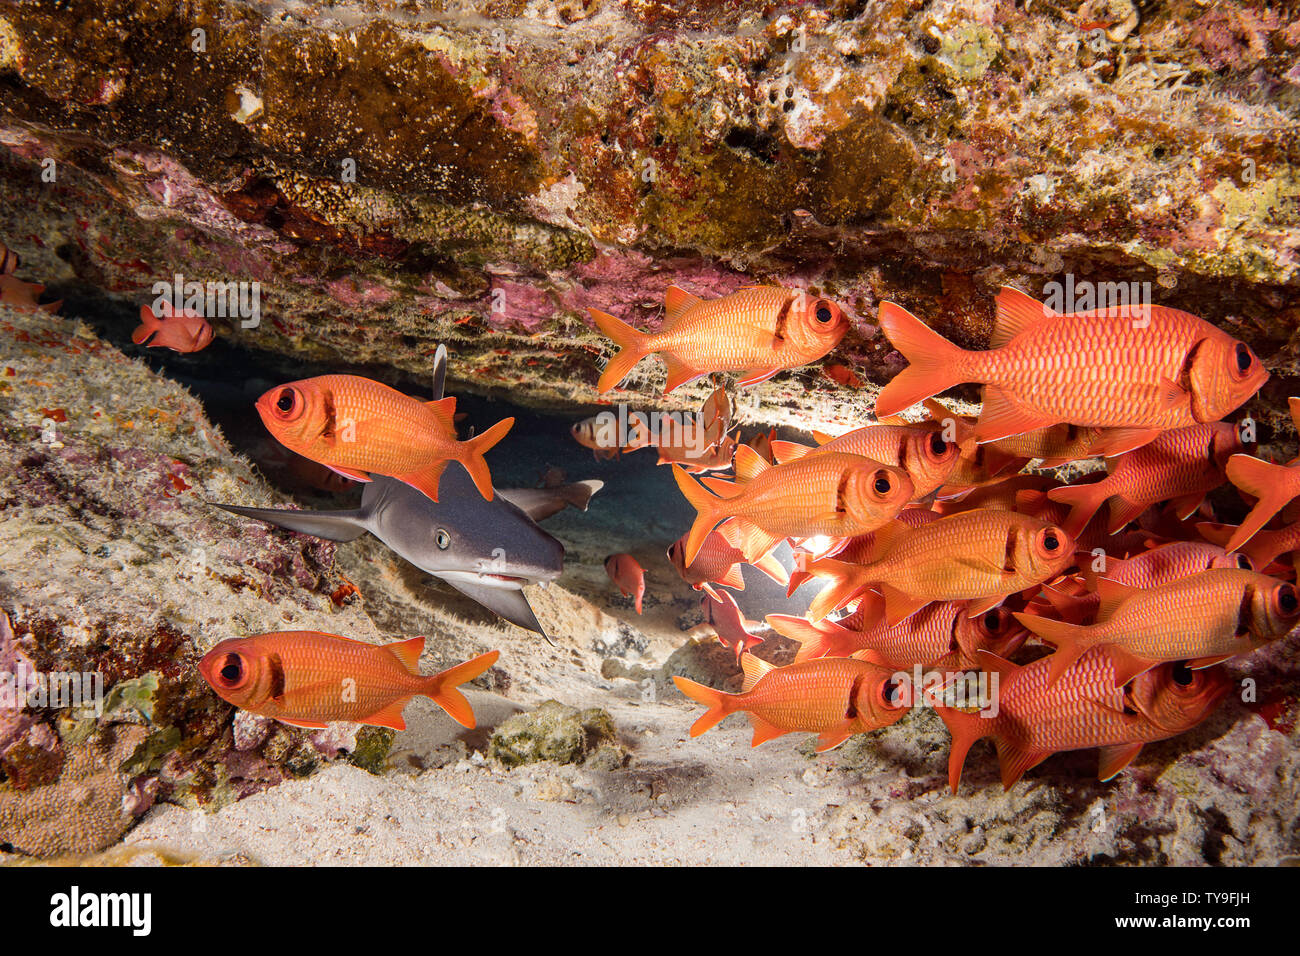 A young whitetip reef shark, Triaenodon obesus, shares a crevice with a school of bigscale soldierfish, Myripristis berndti, Hawaii. Stock Photo